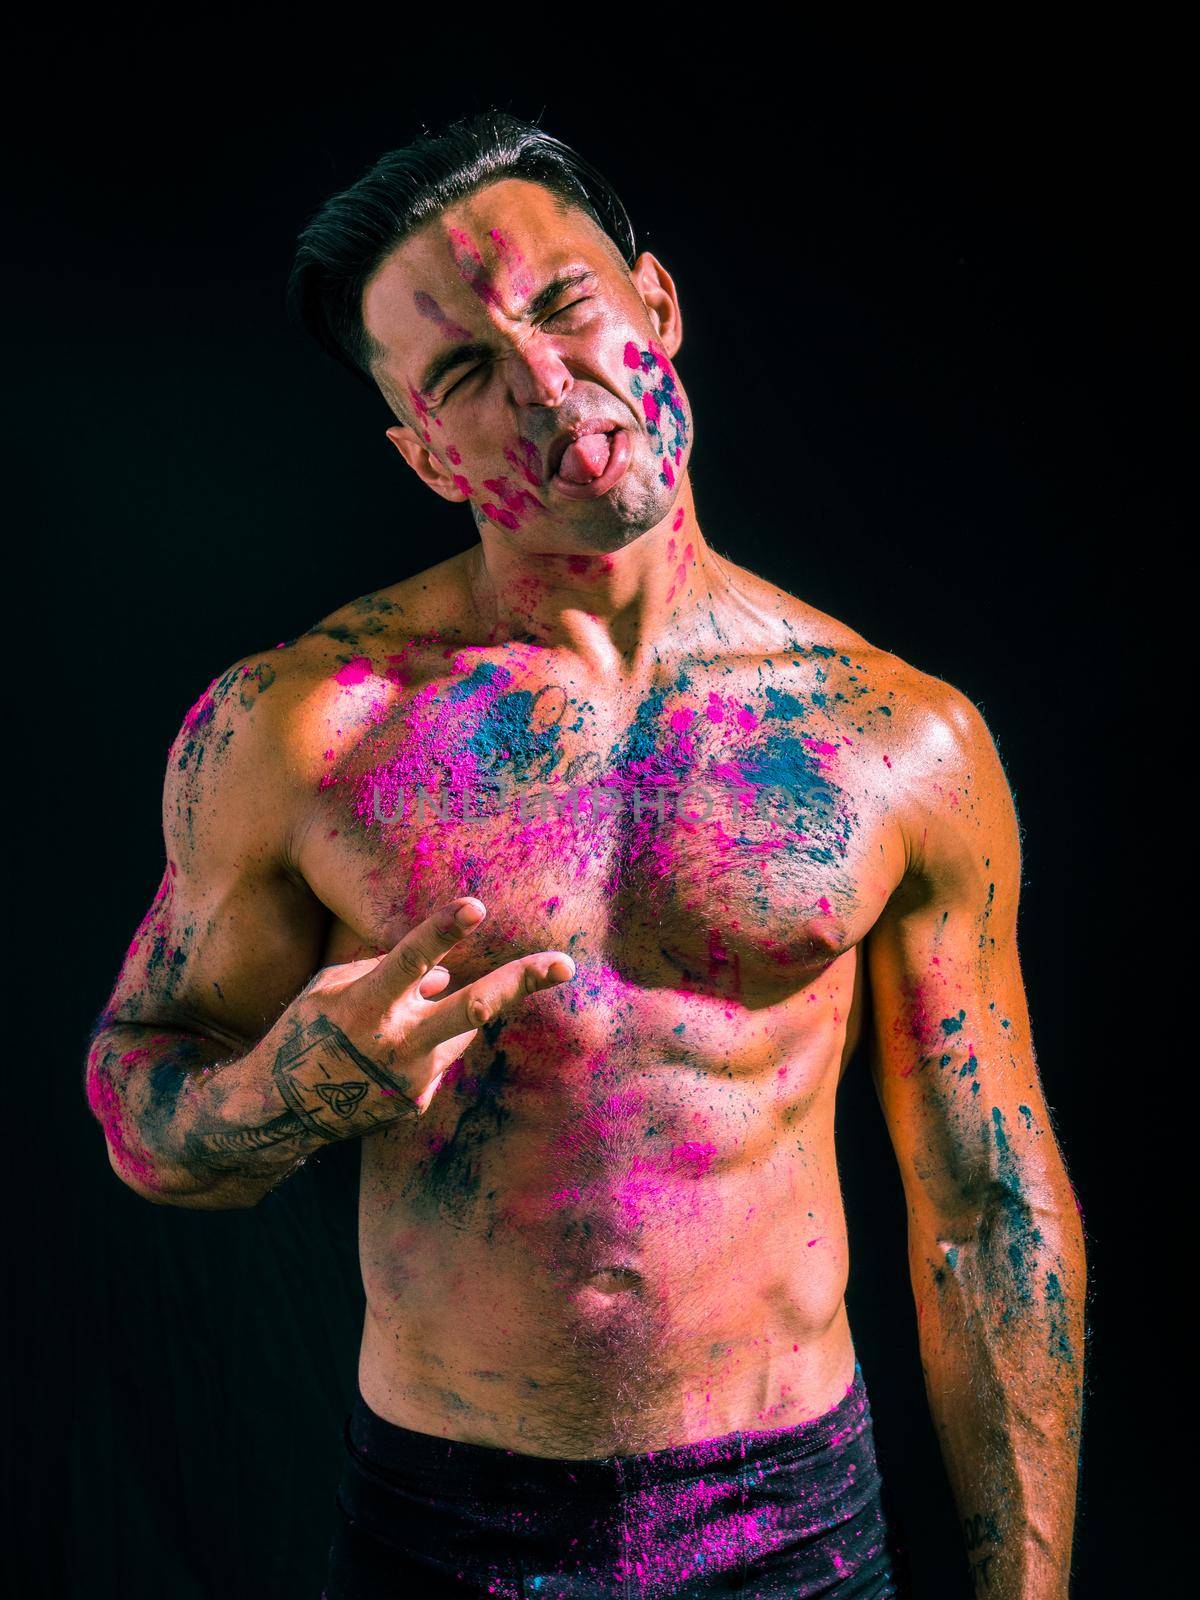 Muscular young man shirtless with skin painted with Holi colors, looking at camera with tongue sticking out